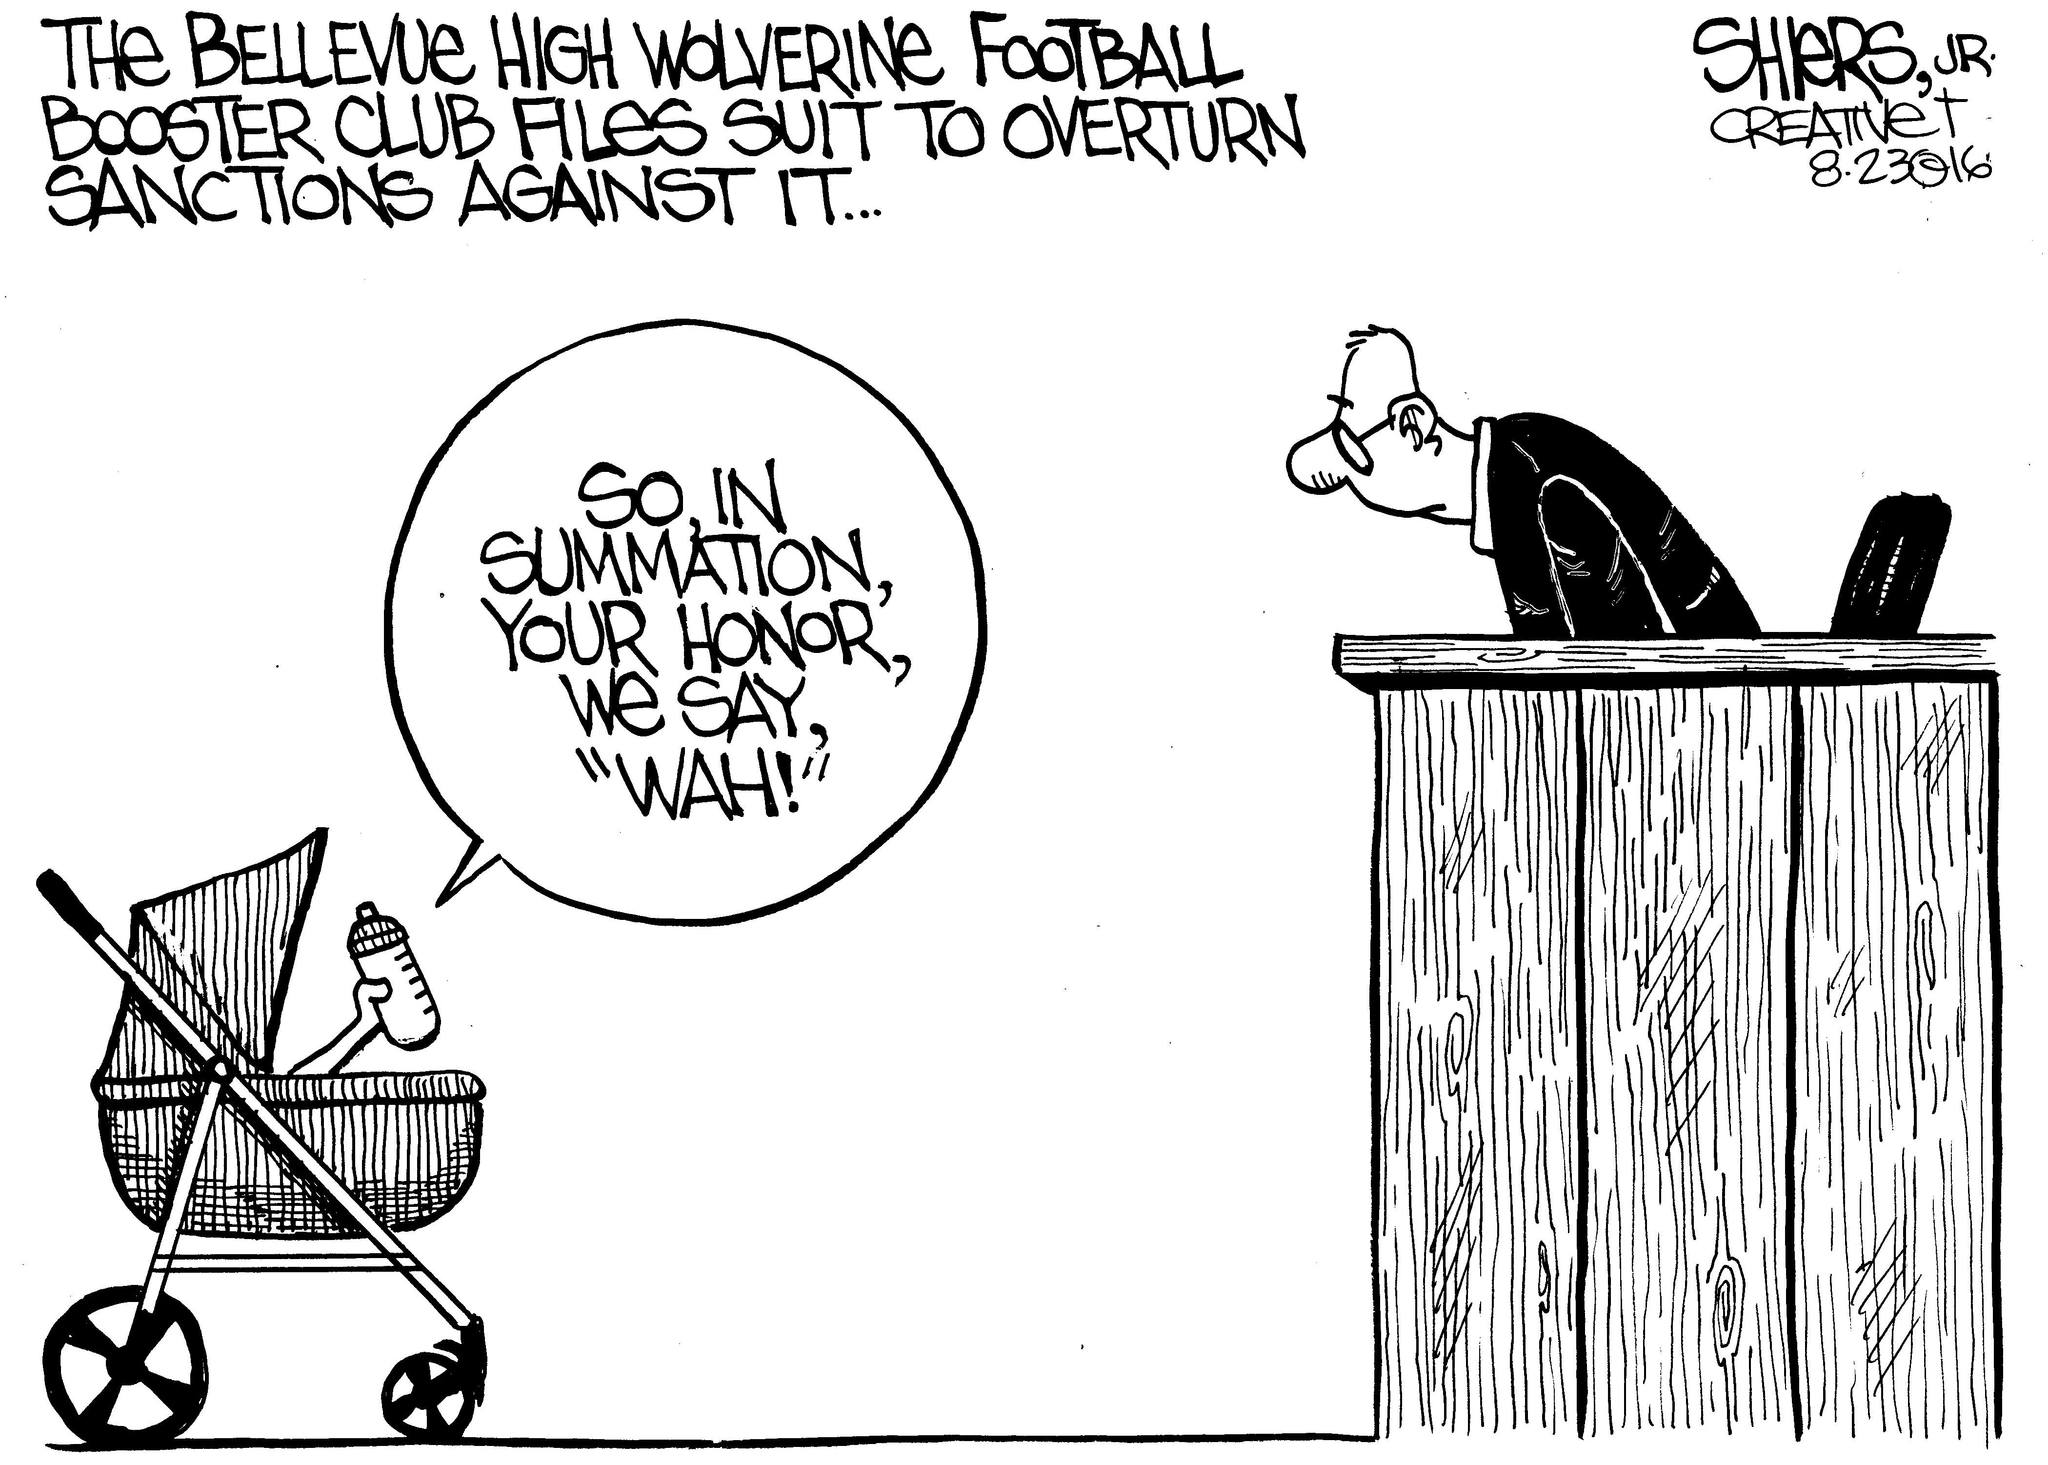 Bellevue football booster club files suit | Cartoon for Sept. 5 - Frank Shiers